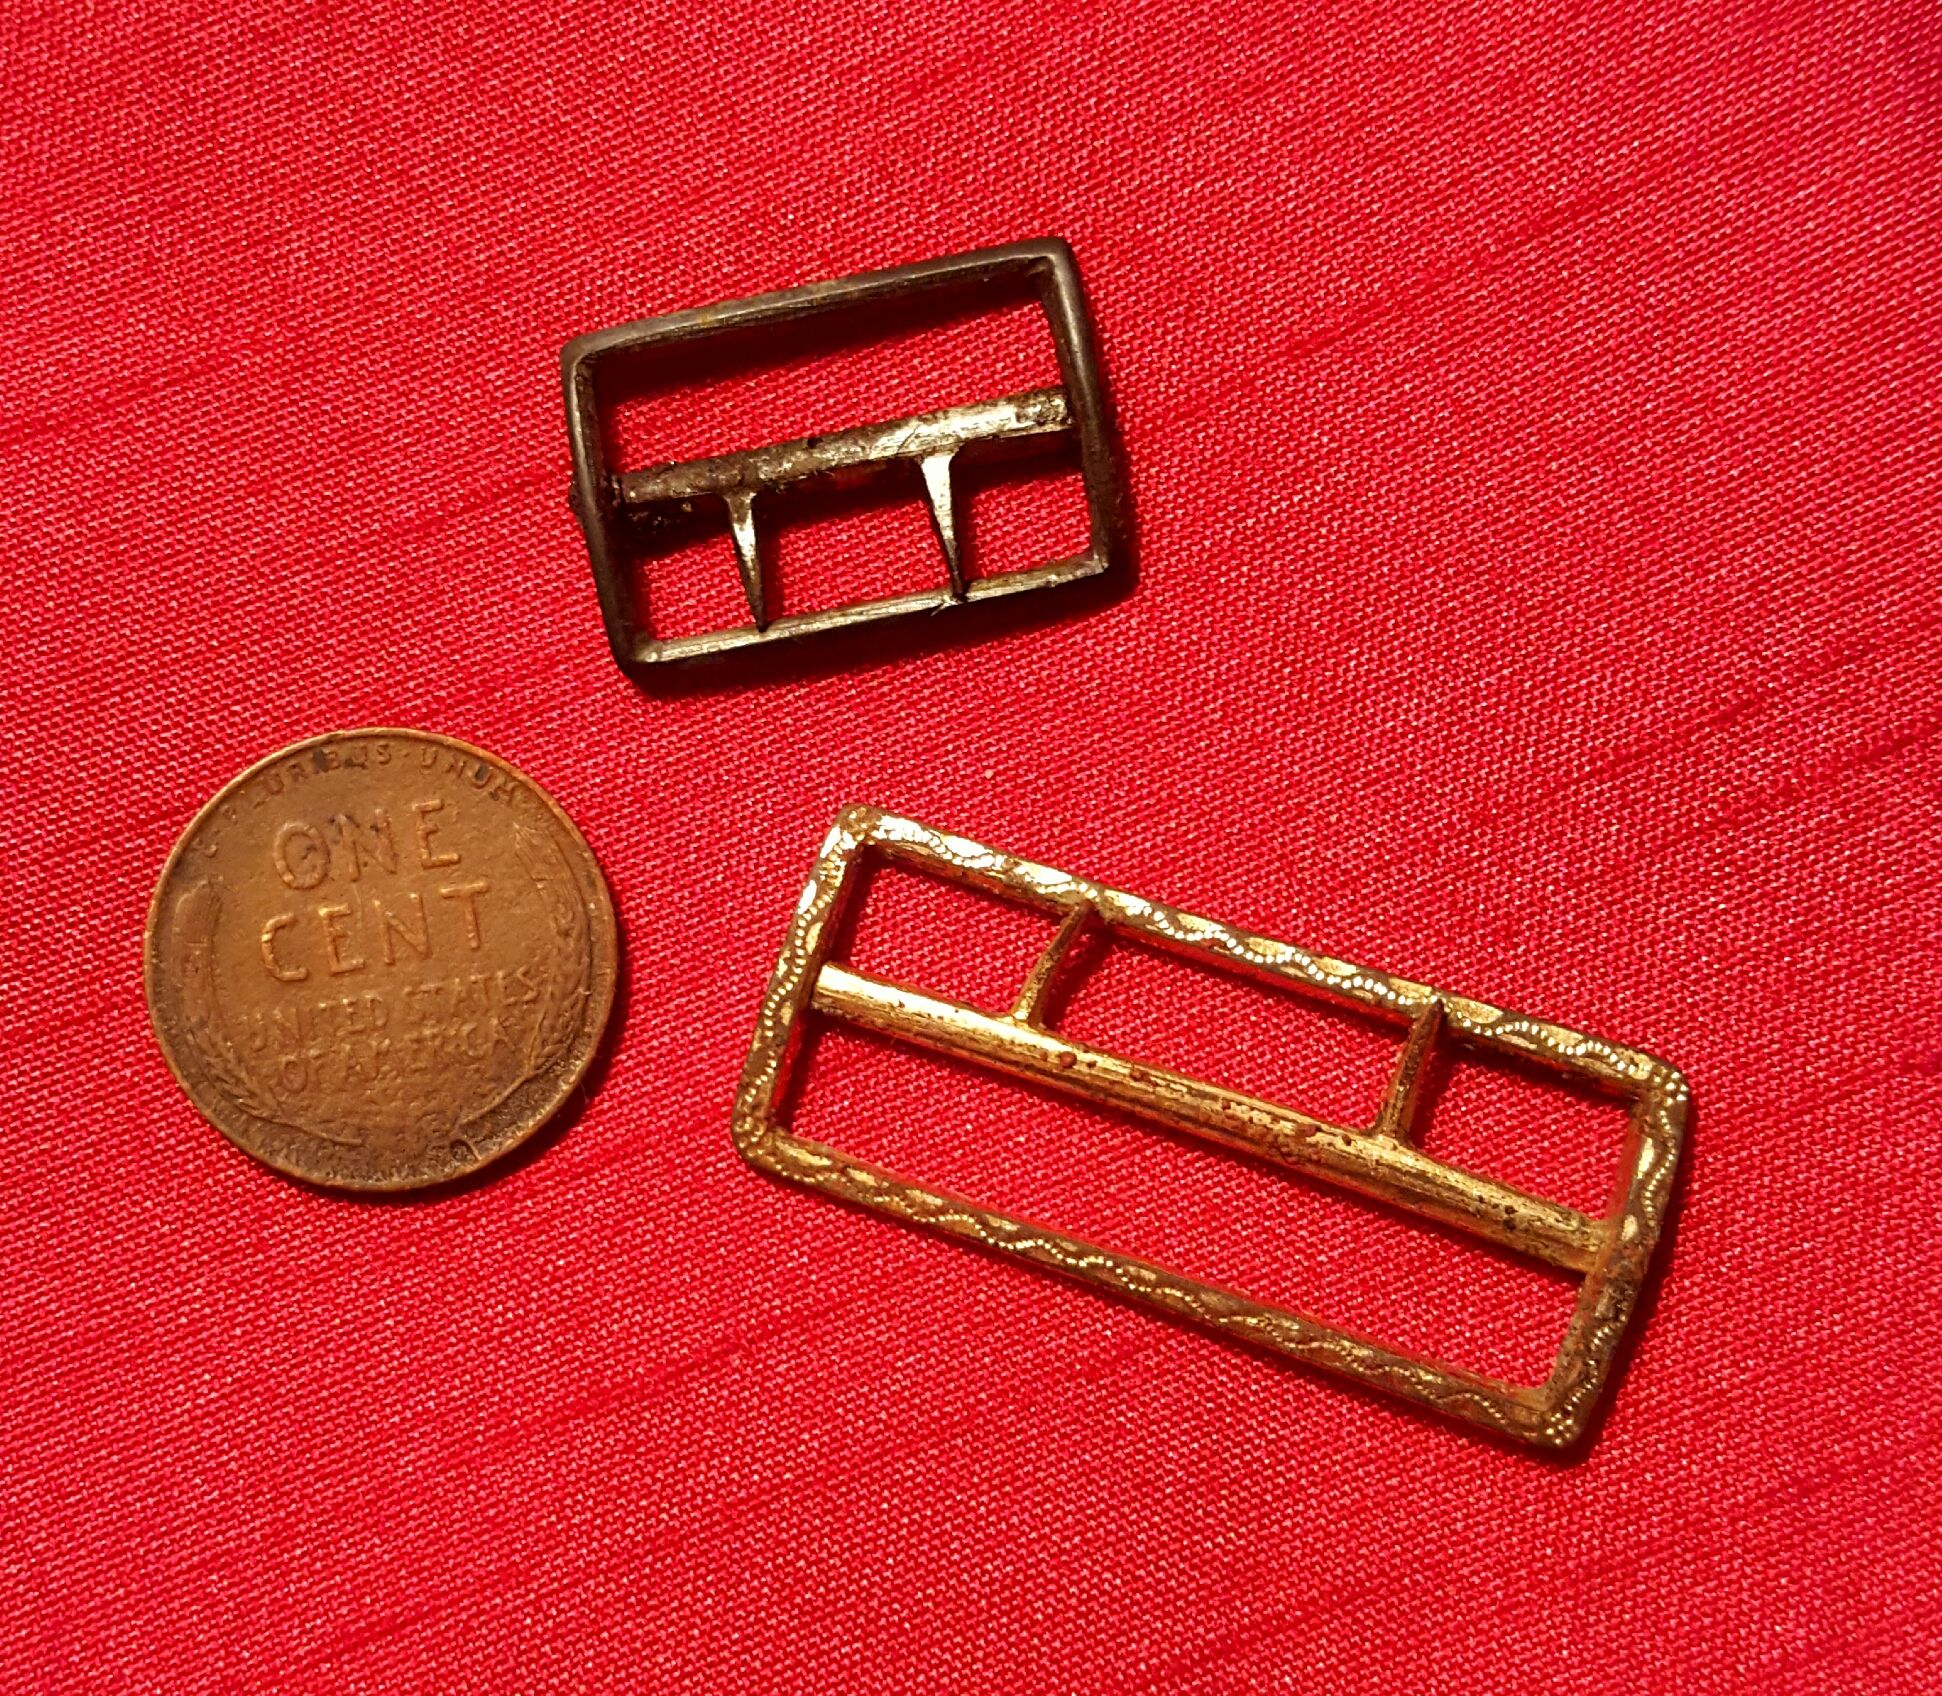 Two small brass buckles; probably used on clothing